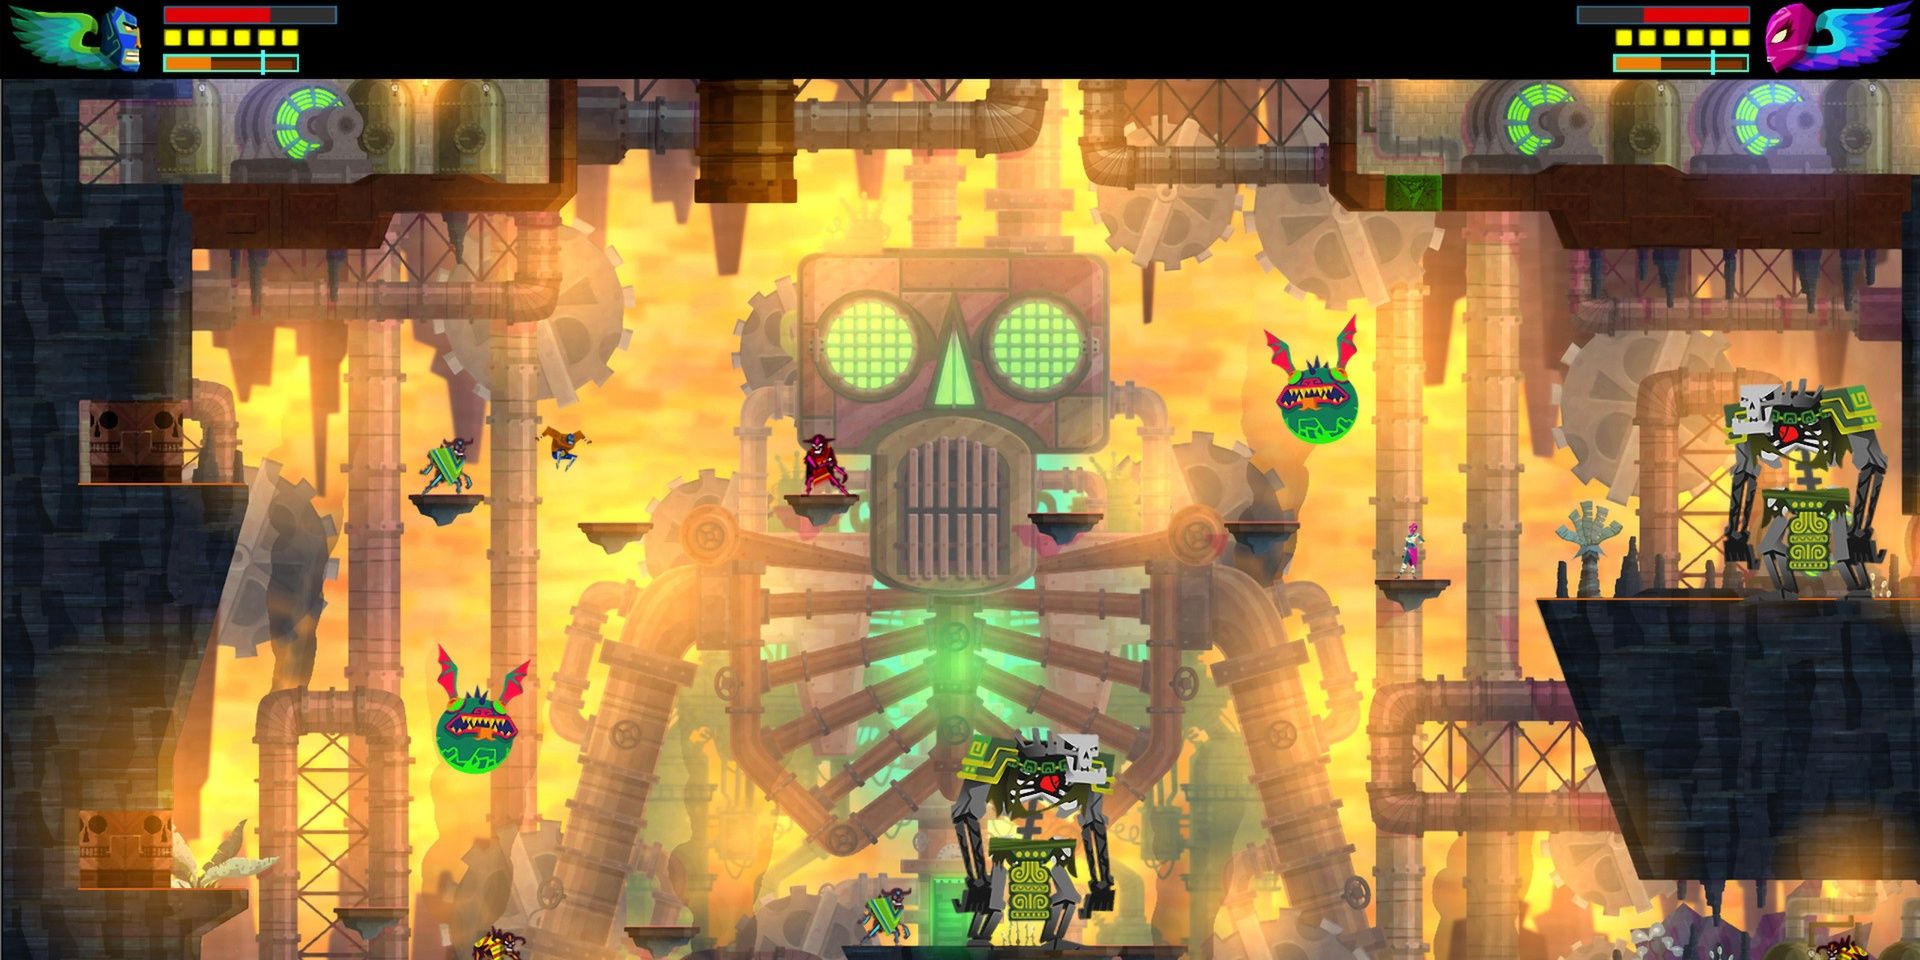 Juan and other characters standing in front of a massive robot in Guacamelee!